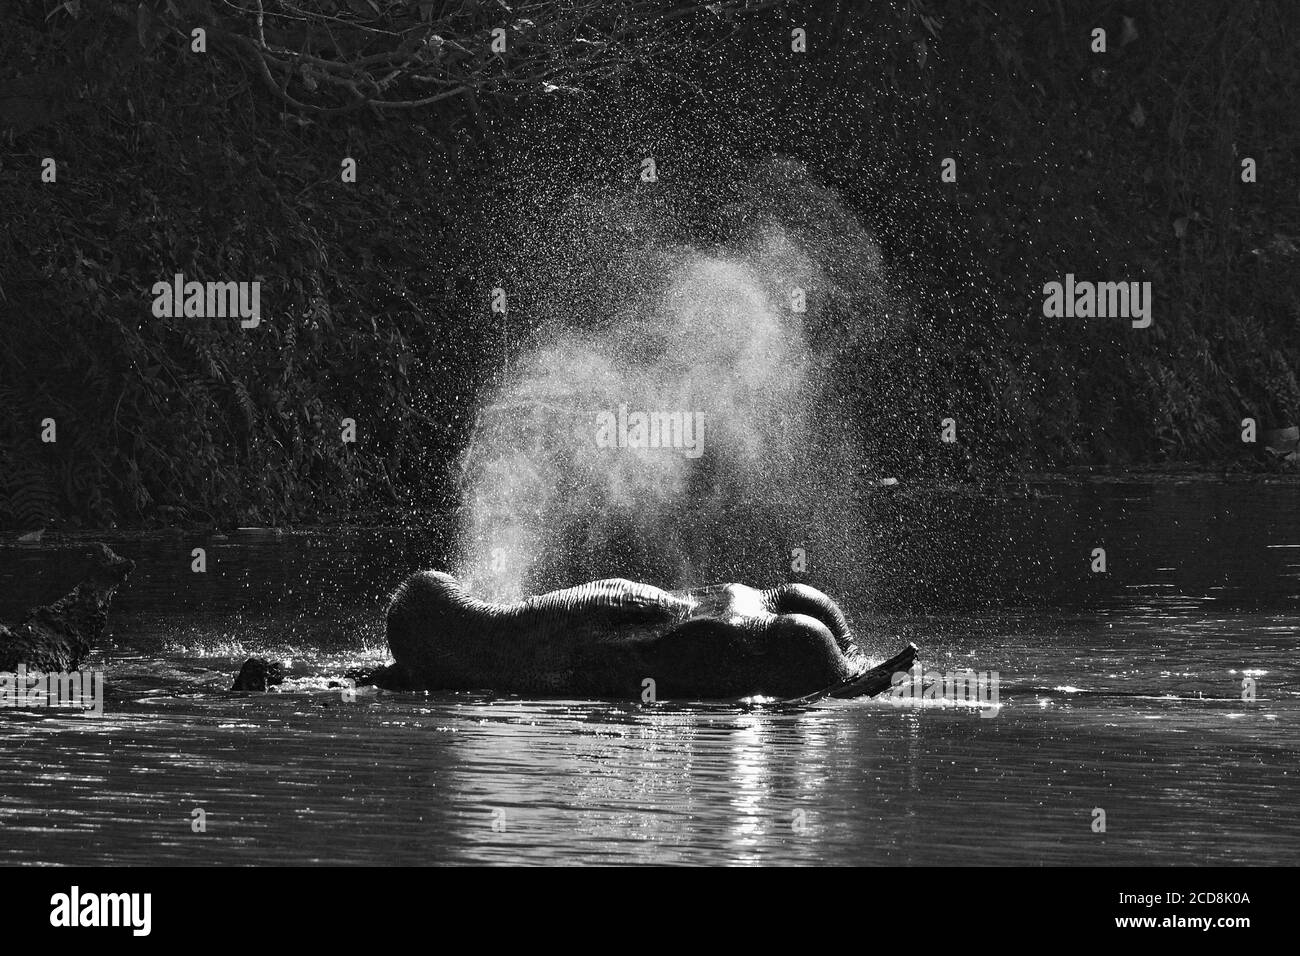 Elephant Is Taking Bath In A River By Spraying Water Stock Photo